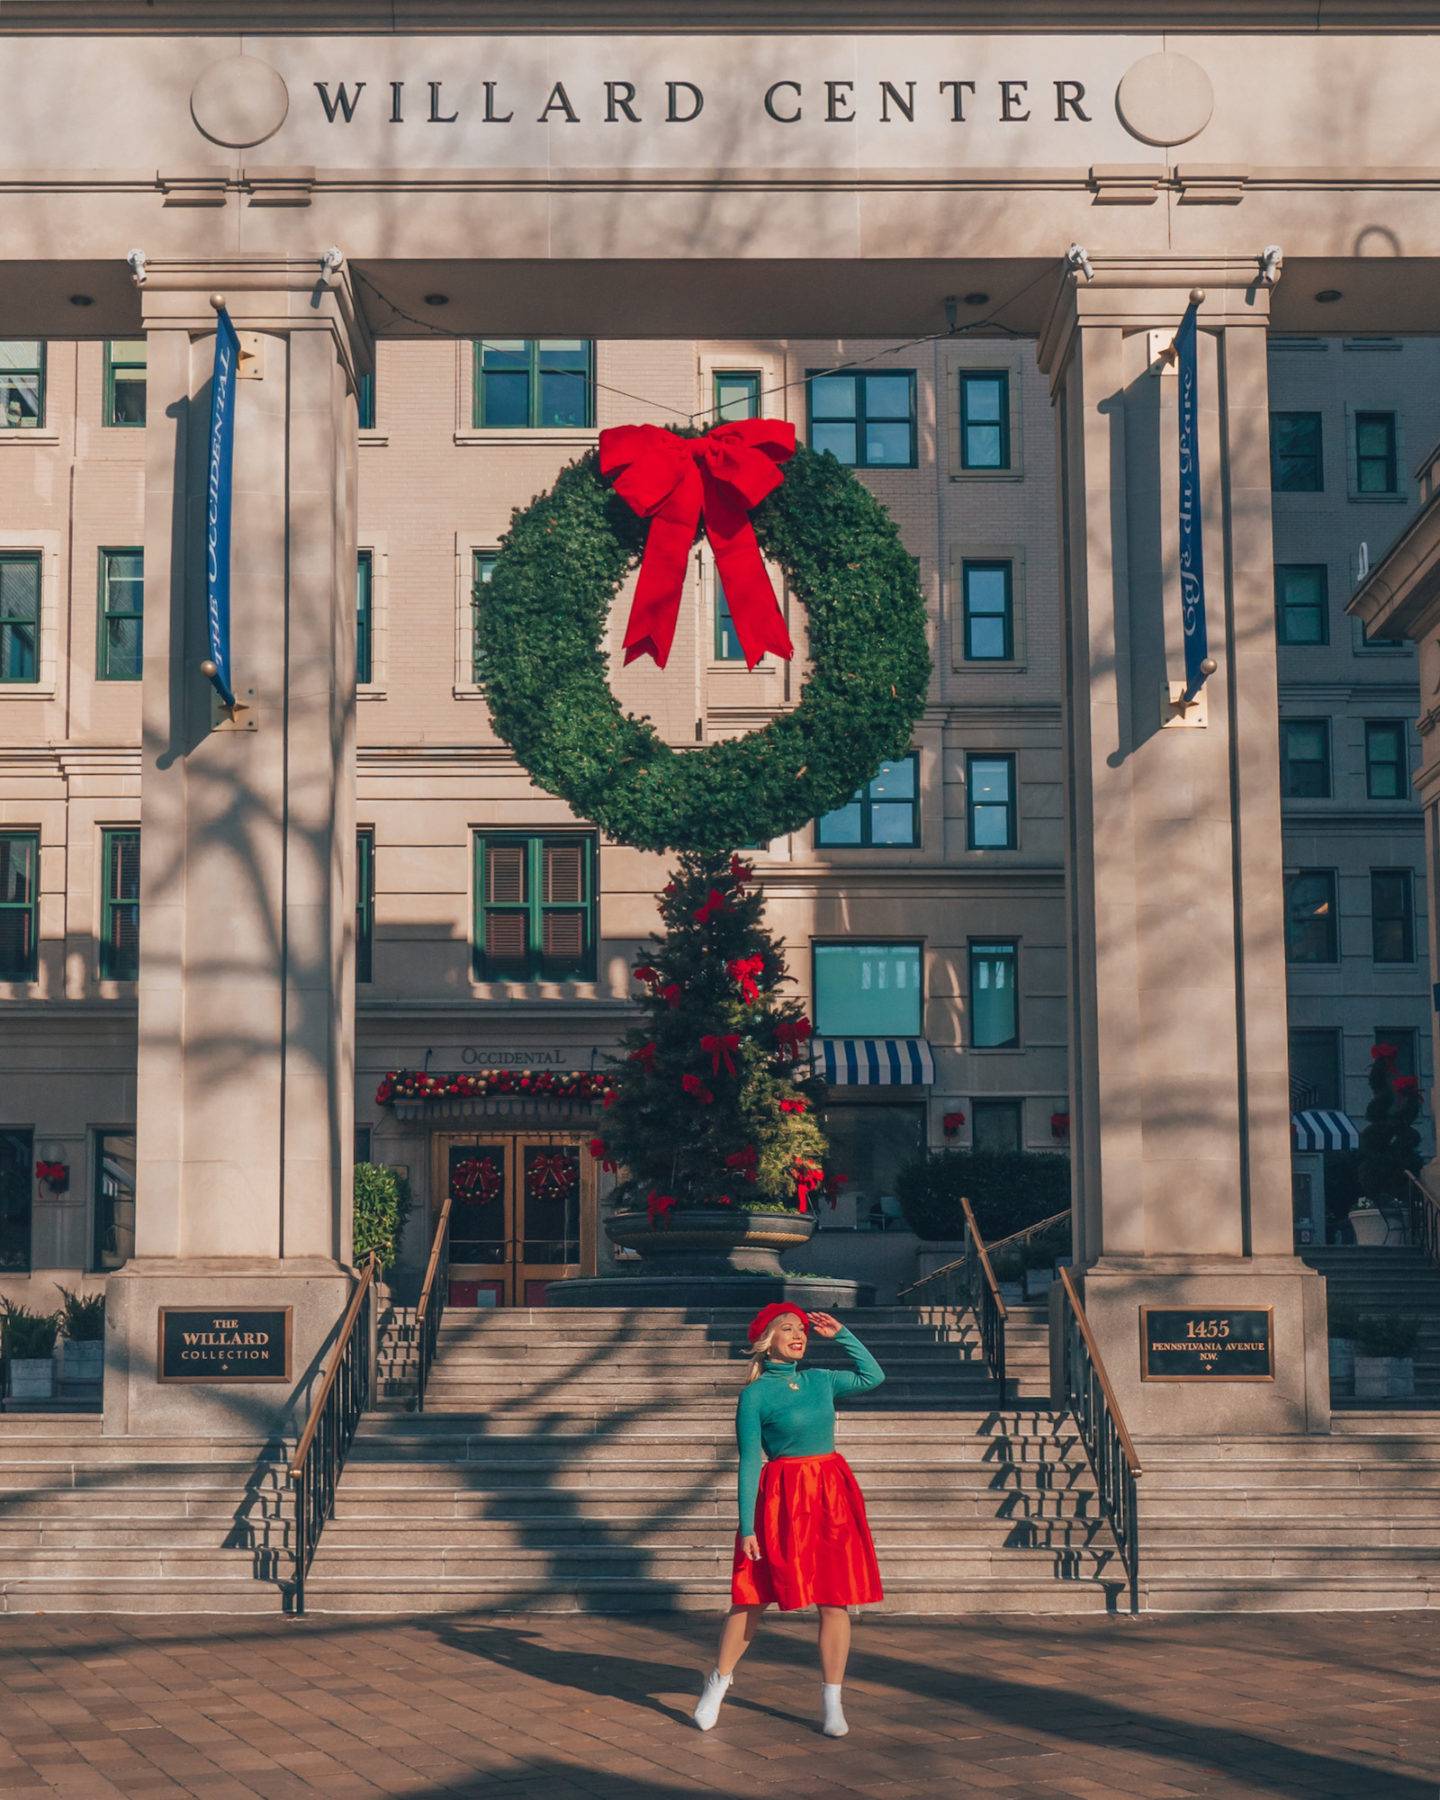 Incredibly festive things to do in Washington DC at Christmas time: Visit the Willard and check out their amazing Christmas decorations